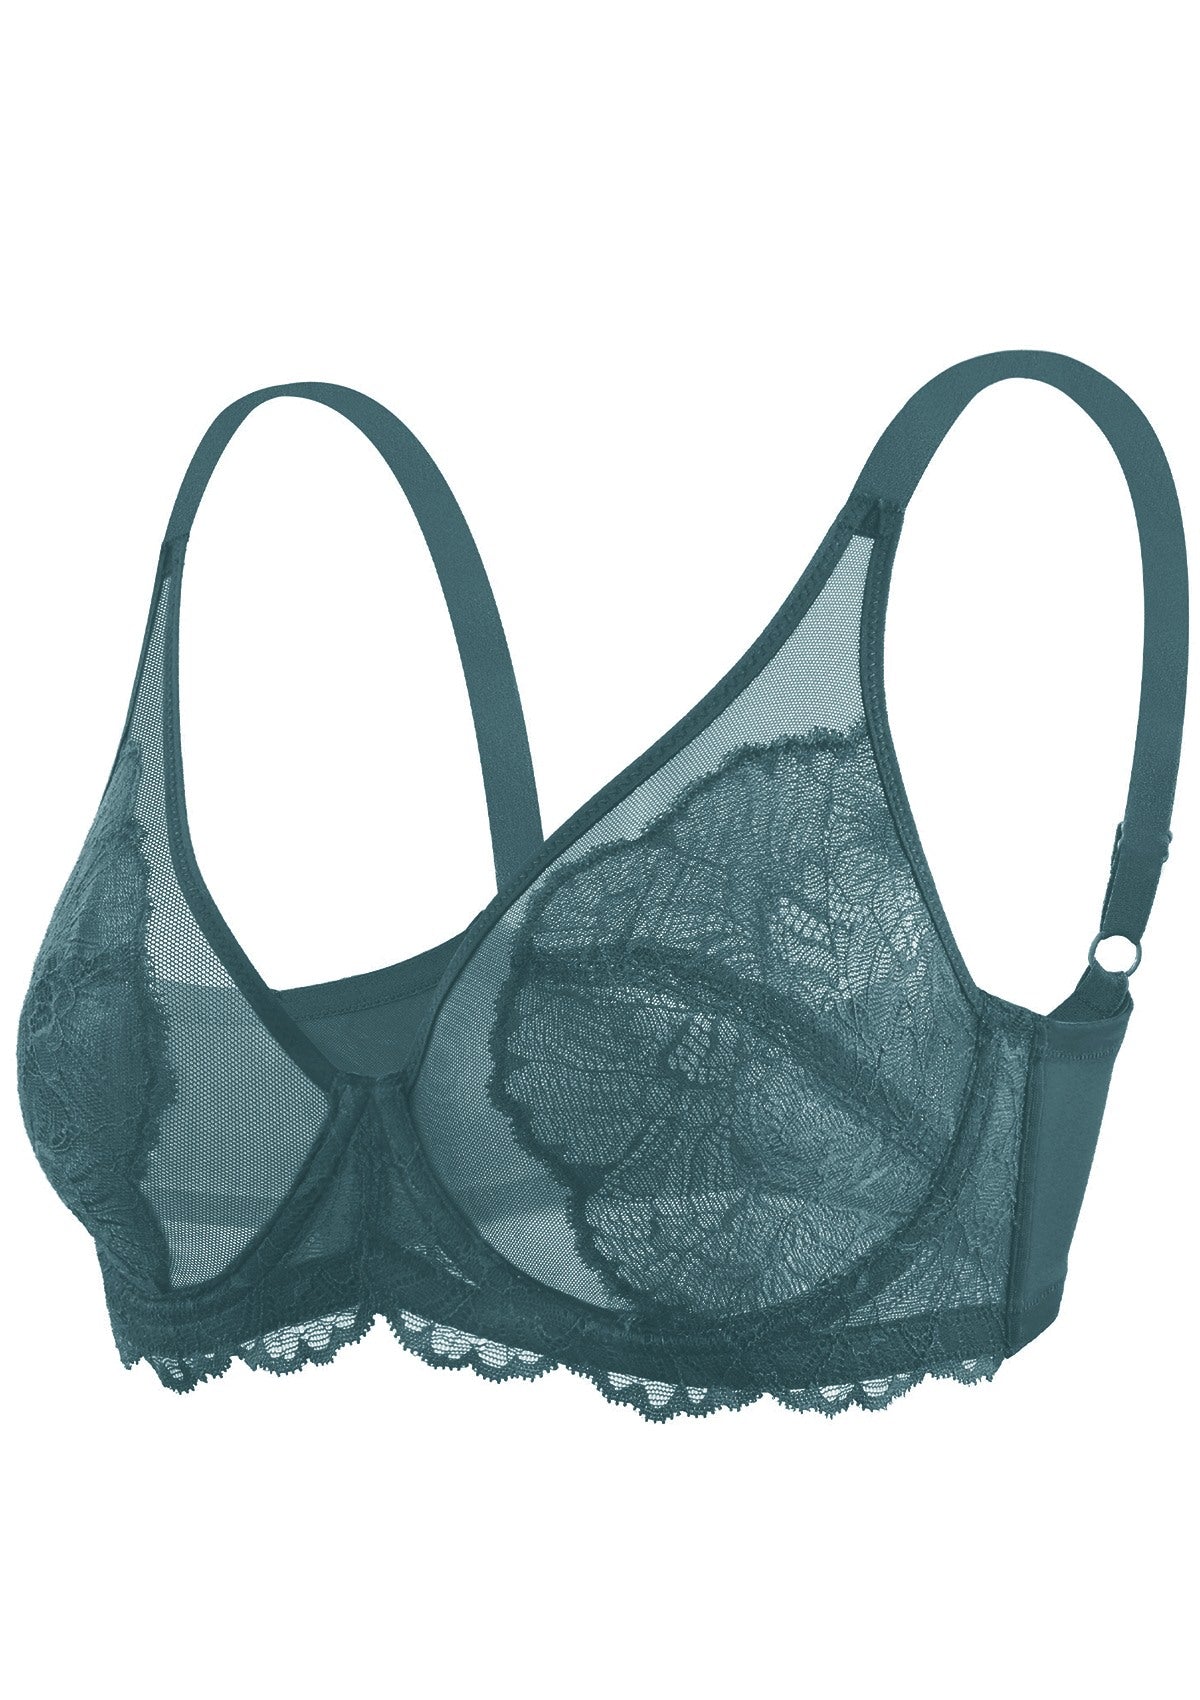 HSIA Blossom Full Figure See-Through Lace Bra For Side And Back Fat - Dark Blue / 40 / D